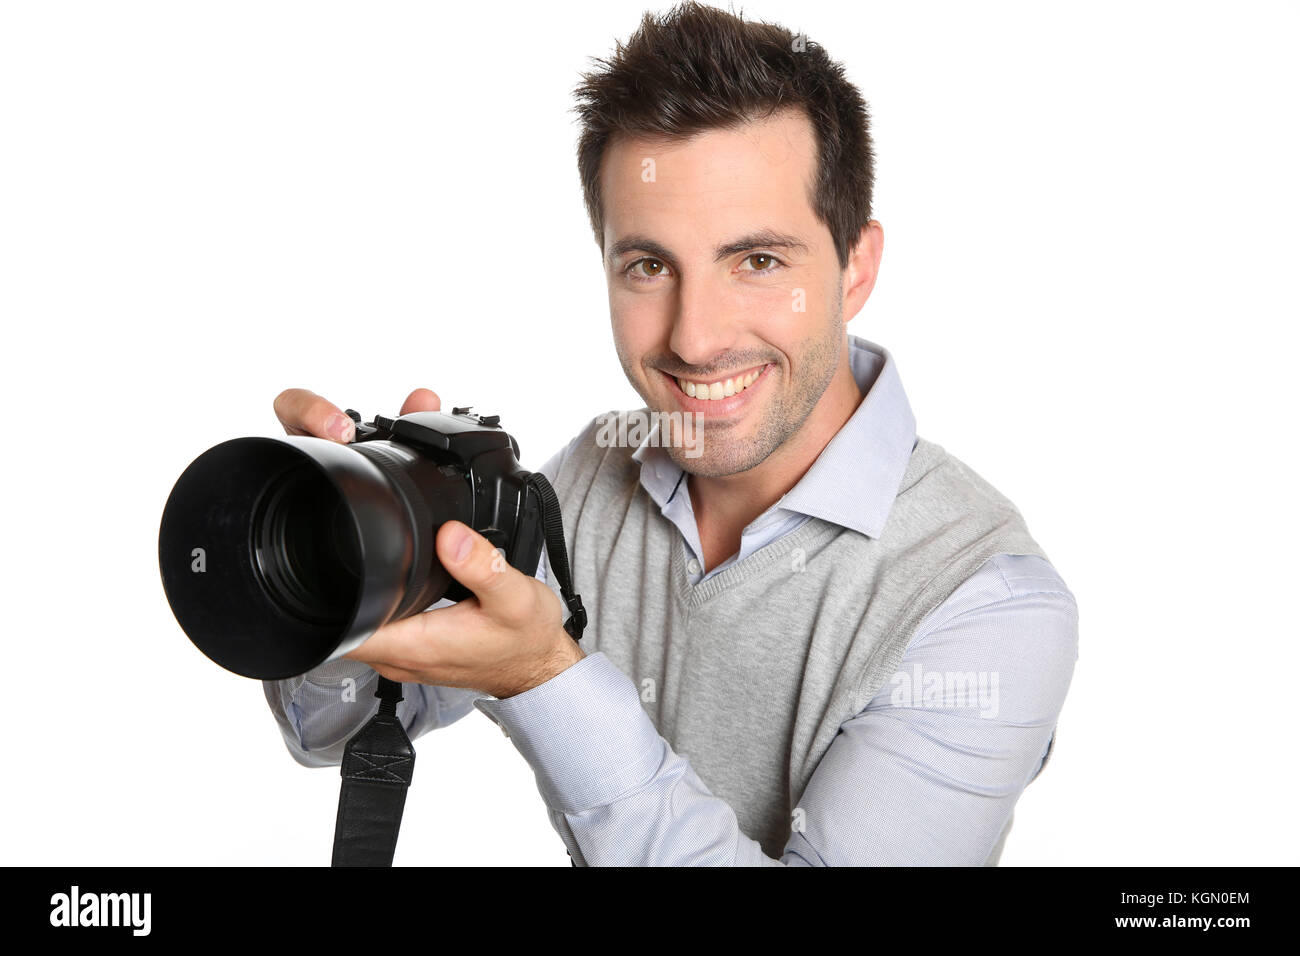 Amateur model hi-res stock photography and images image picture